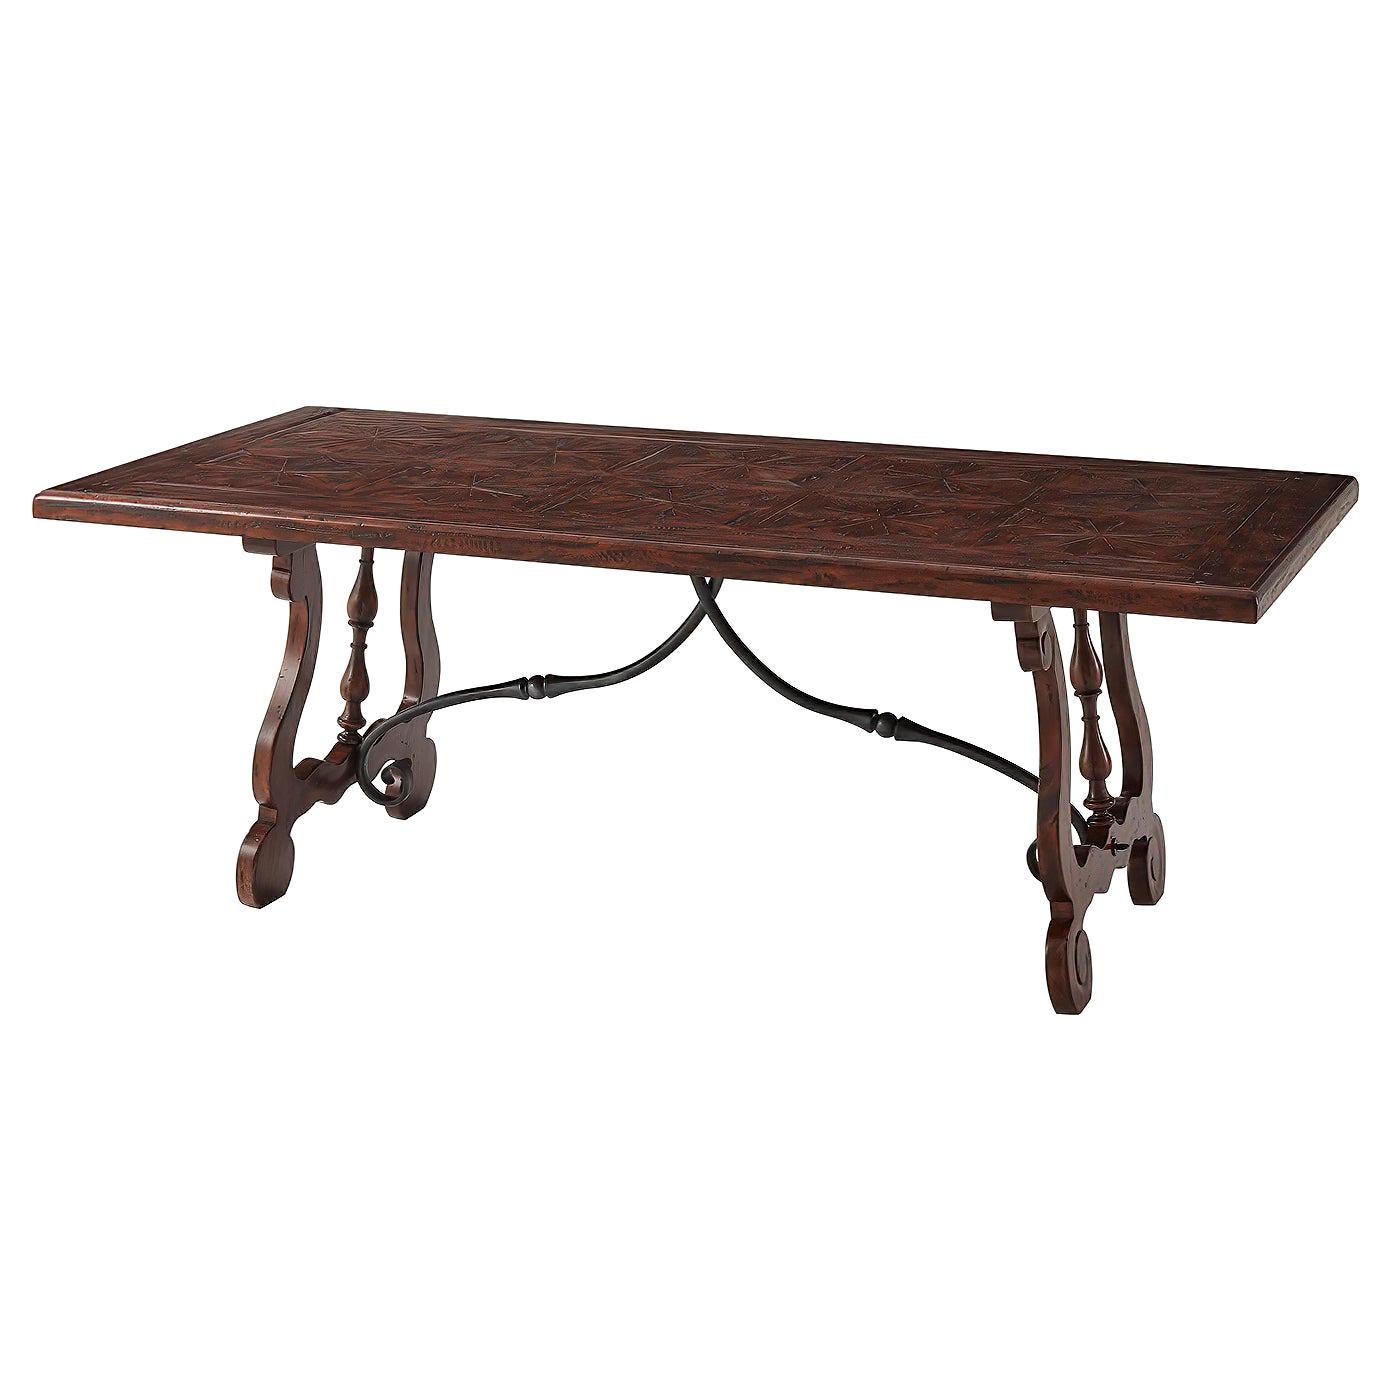 Italian Parquetry Refectory Dining Table